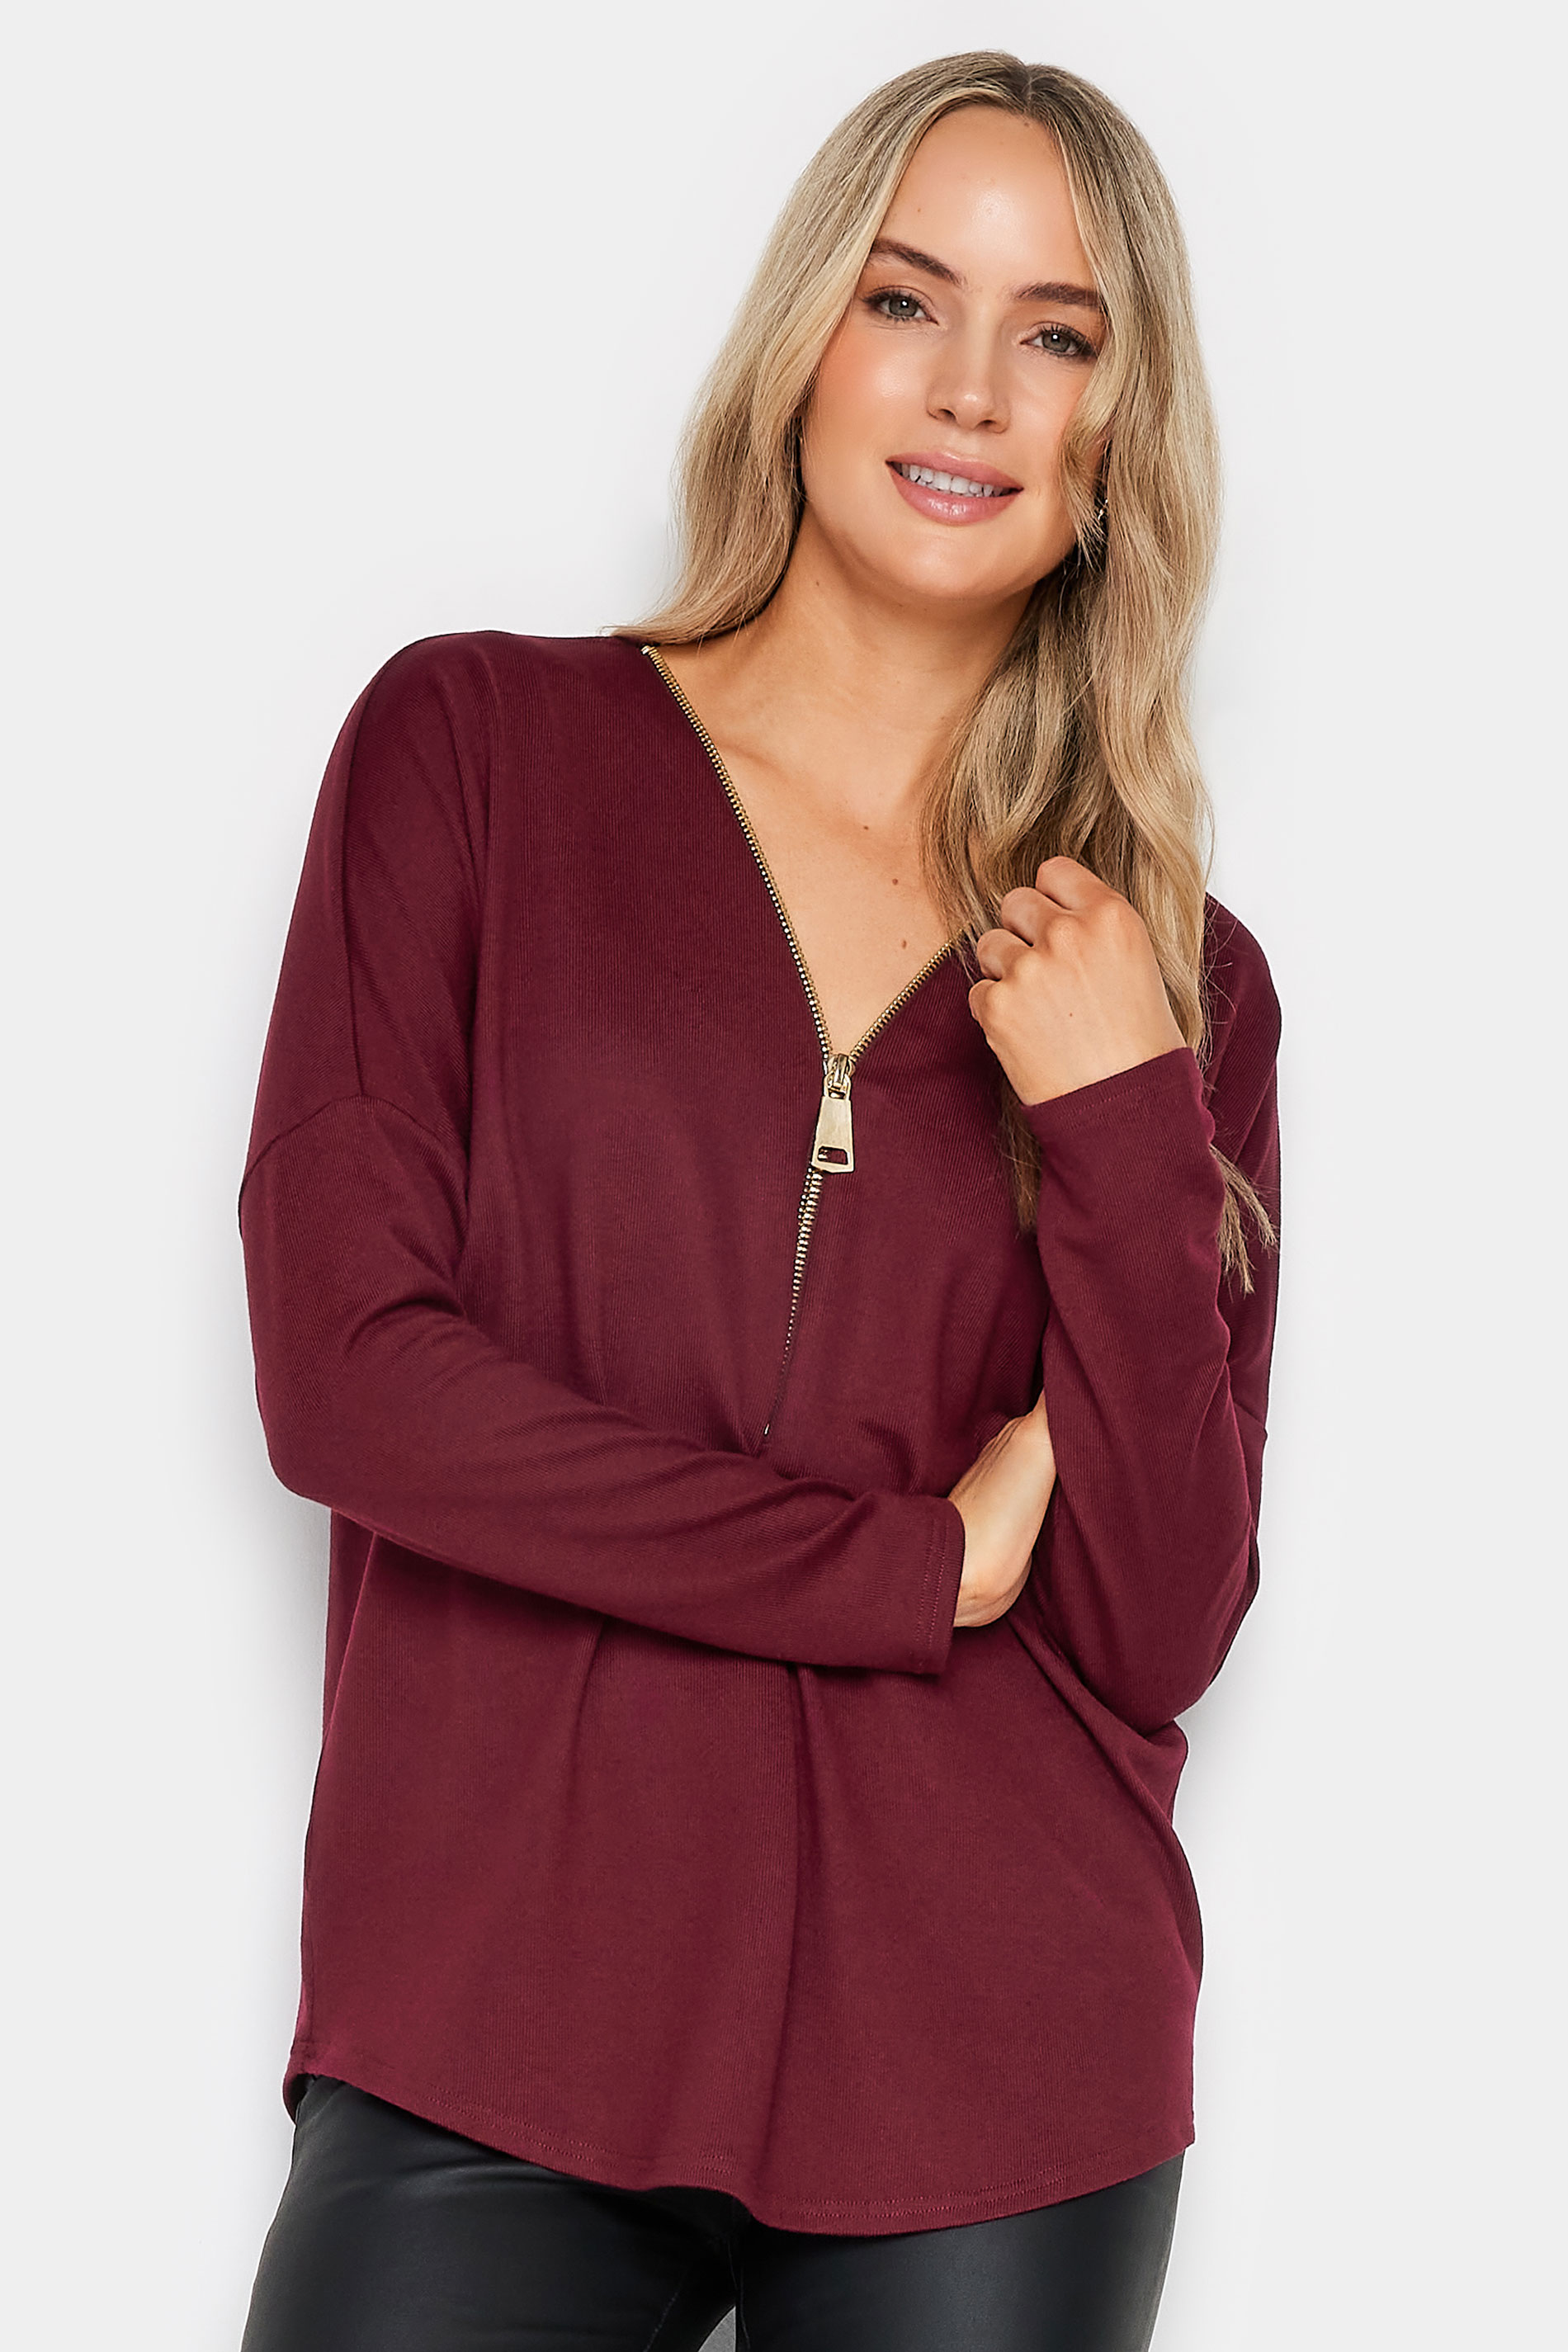 LTS Tall Burgundy Red Zip Front Top | Long Tall Sally  1